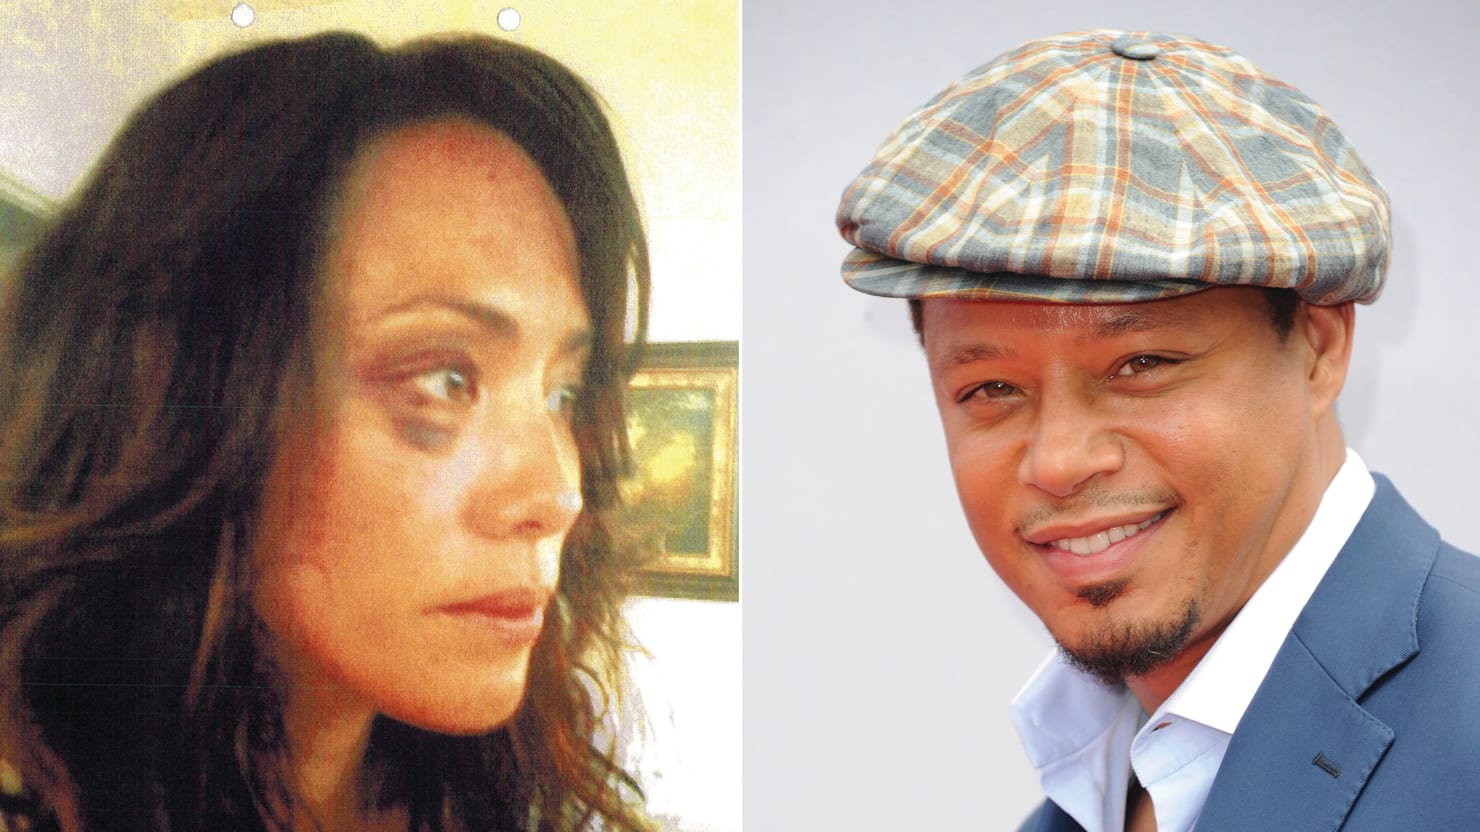 Terrence Howard, Star of 'The Butler,' Is an Actor With a Dark Past